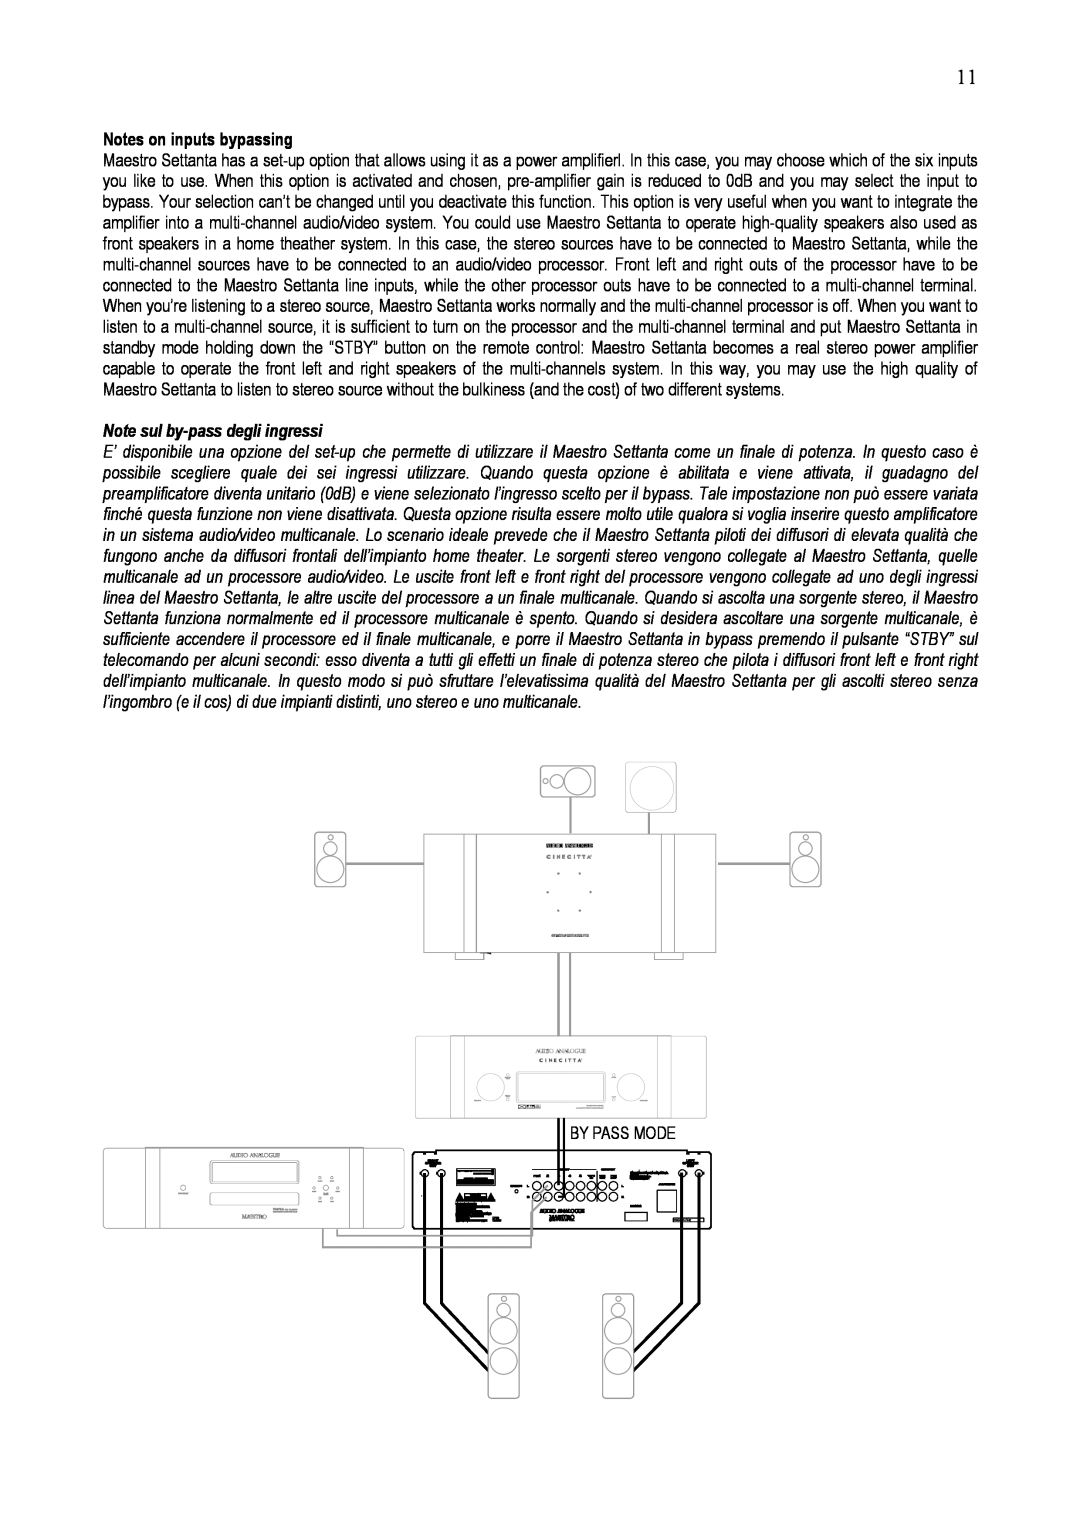 Audio Analogue SRL e t t a n t a owner manual Notes on inputs bypassing, Note sul by-passdegli ingressi 